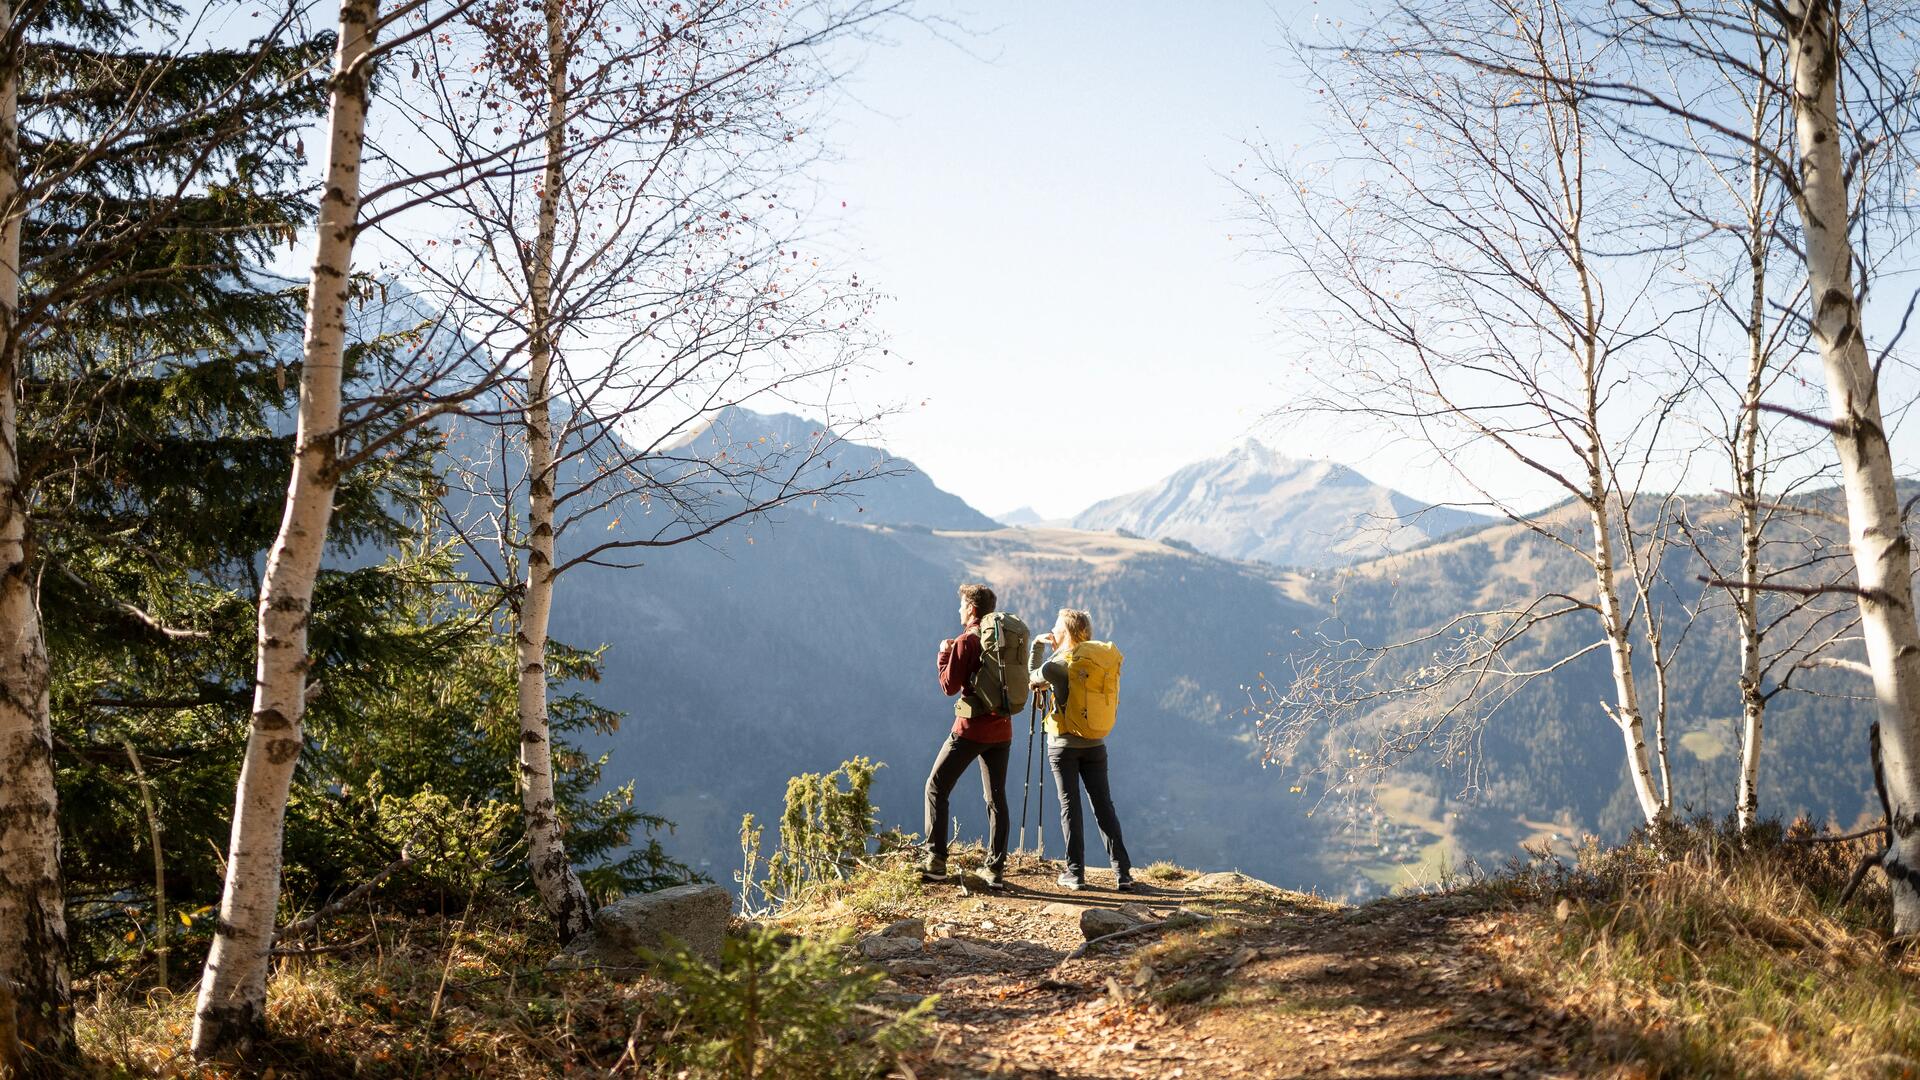 Hiking | Hike up, pick up! Our advice for hiking responsibly